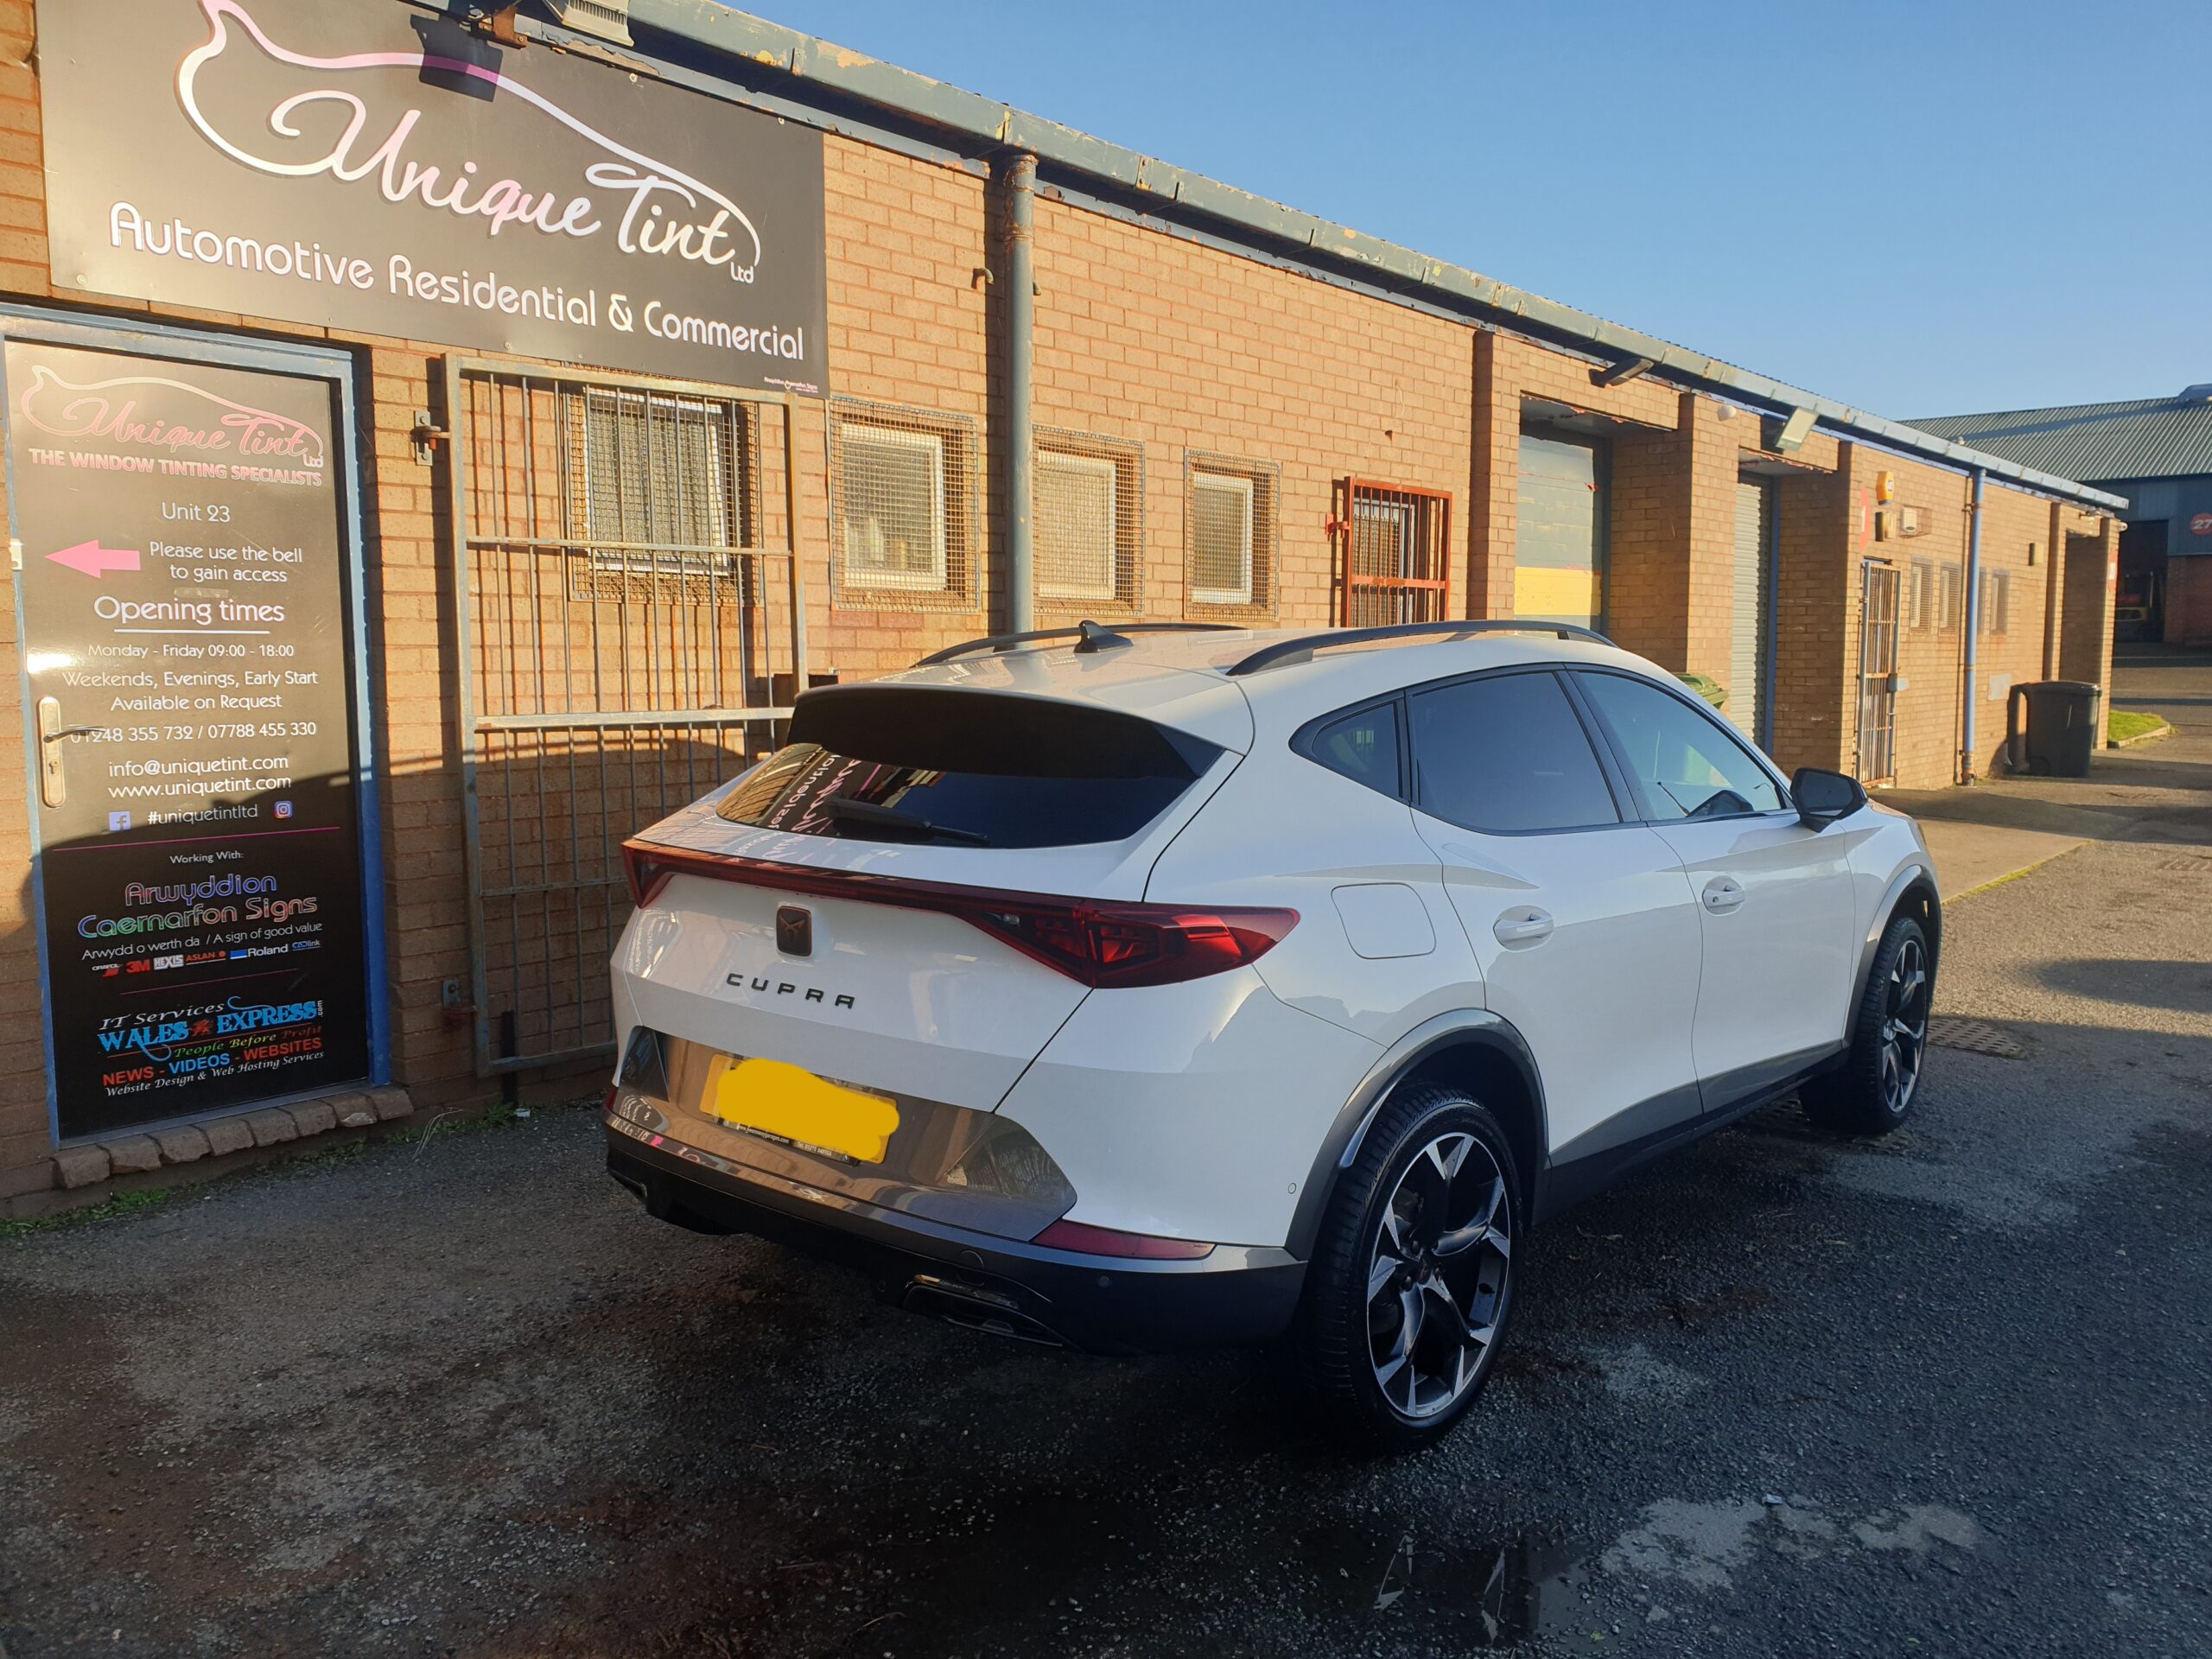 Cupra Formentor tinted with 15% level - Window Tinting Services In North  Wales by Unique Tint LTD